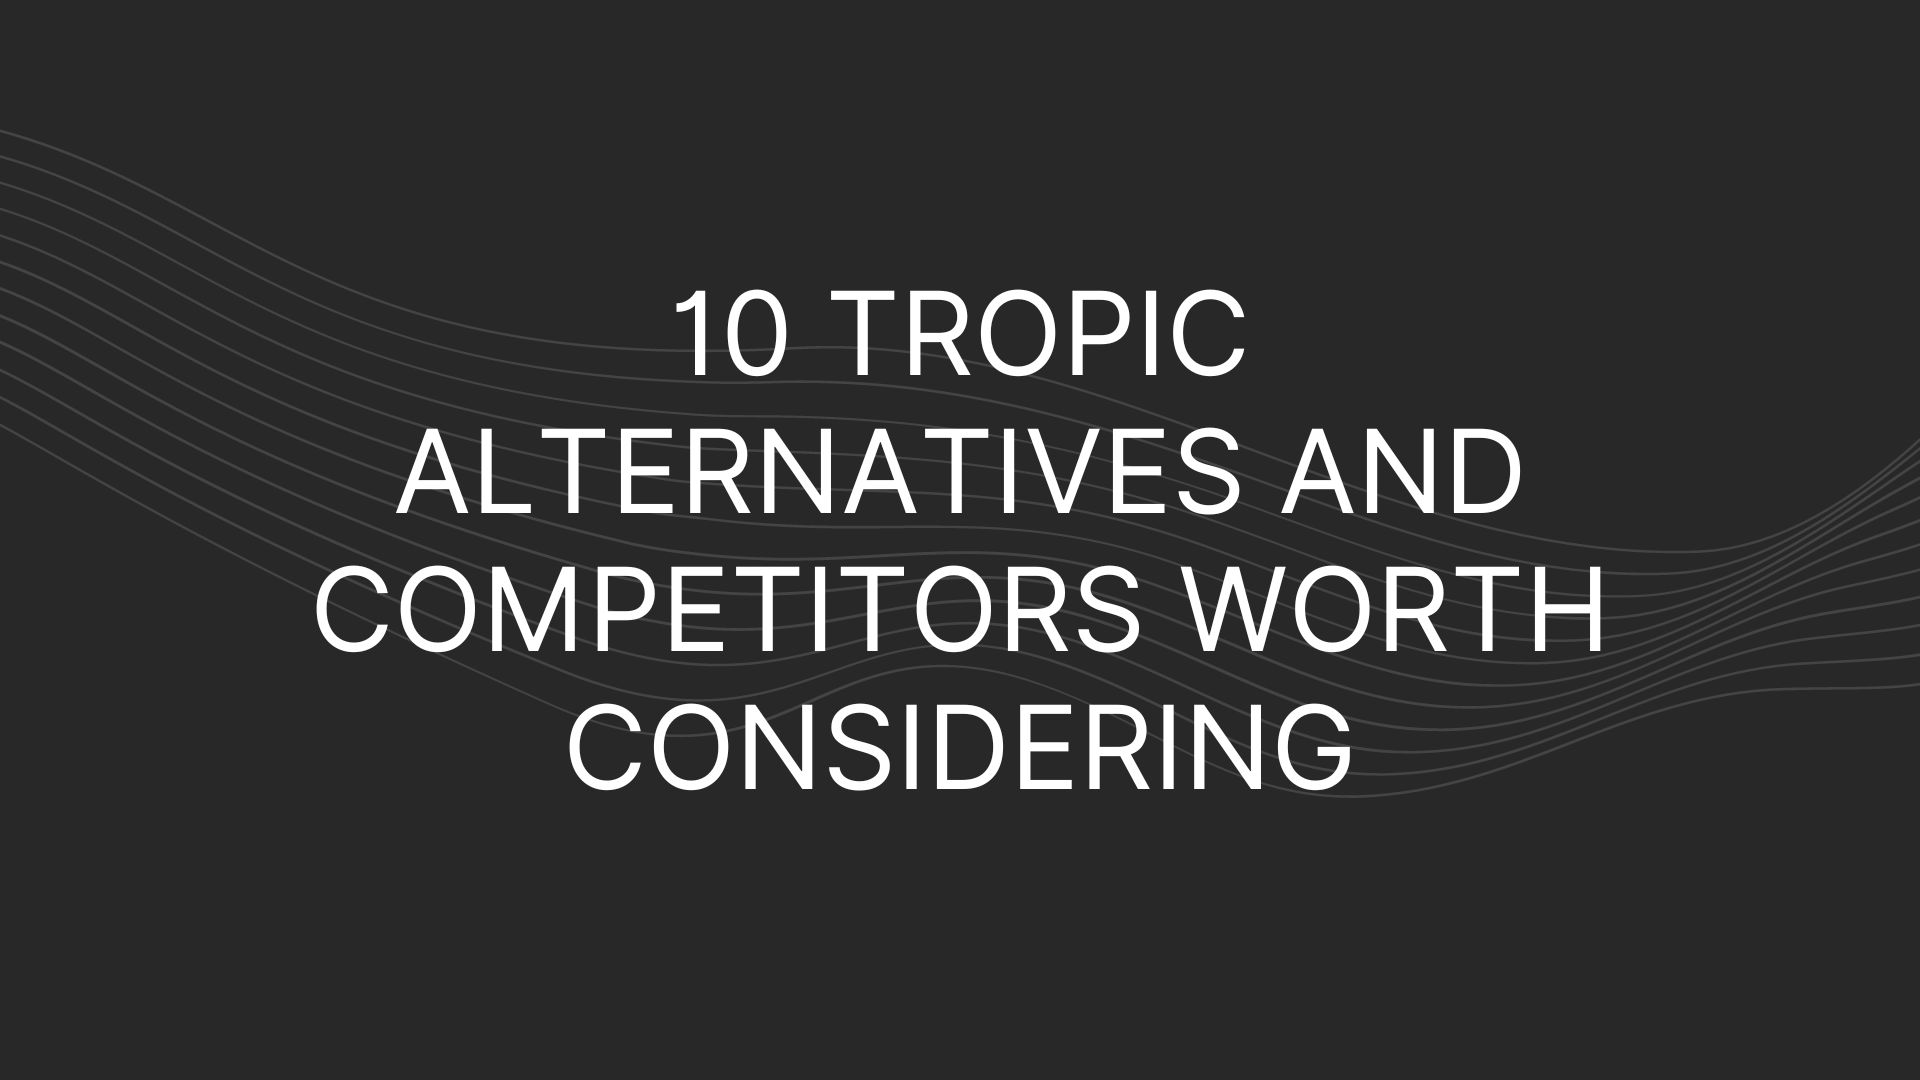 10 Tropic Alternatives and Competitors Worth Considering